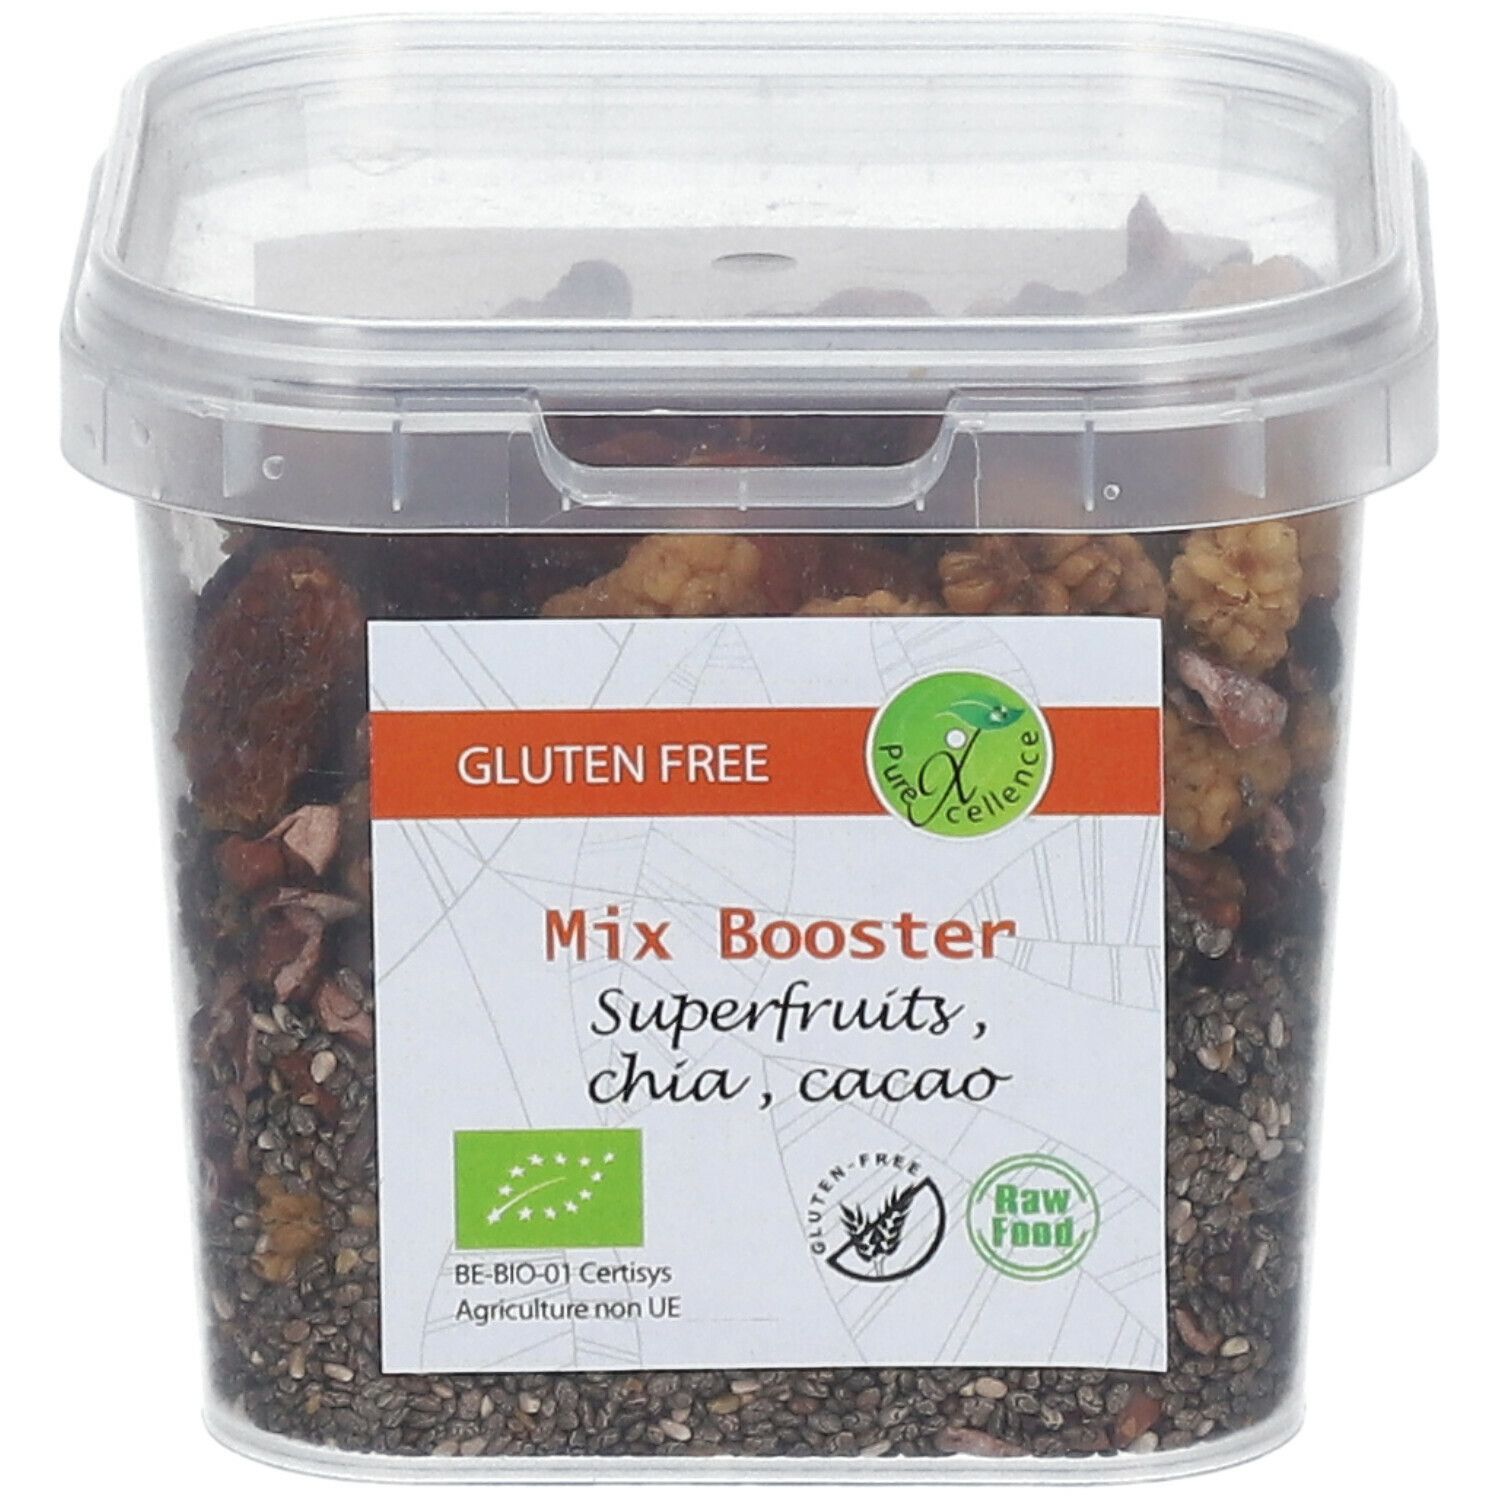 Mix Boster Superfruits, Chia, Cacao